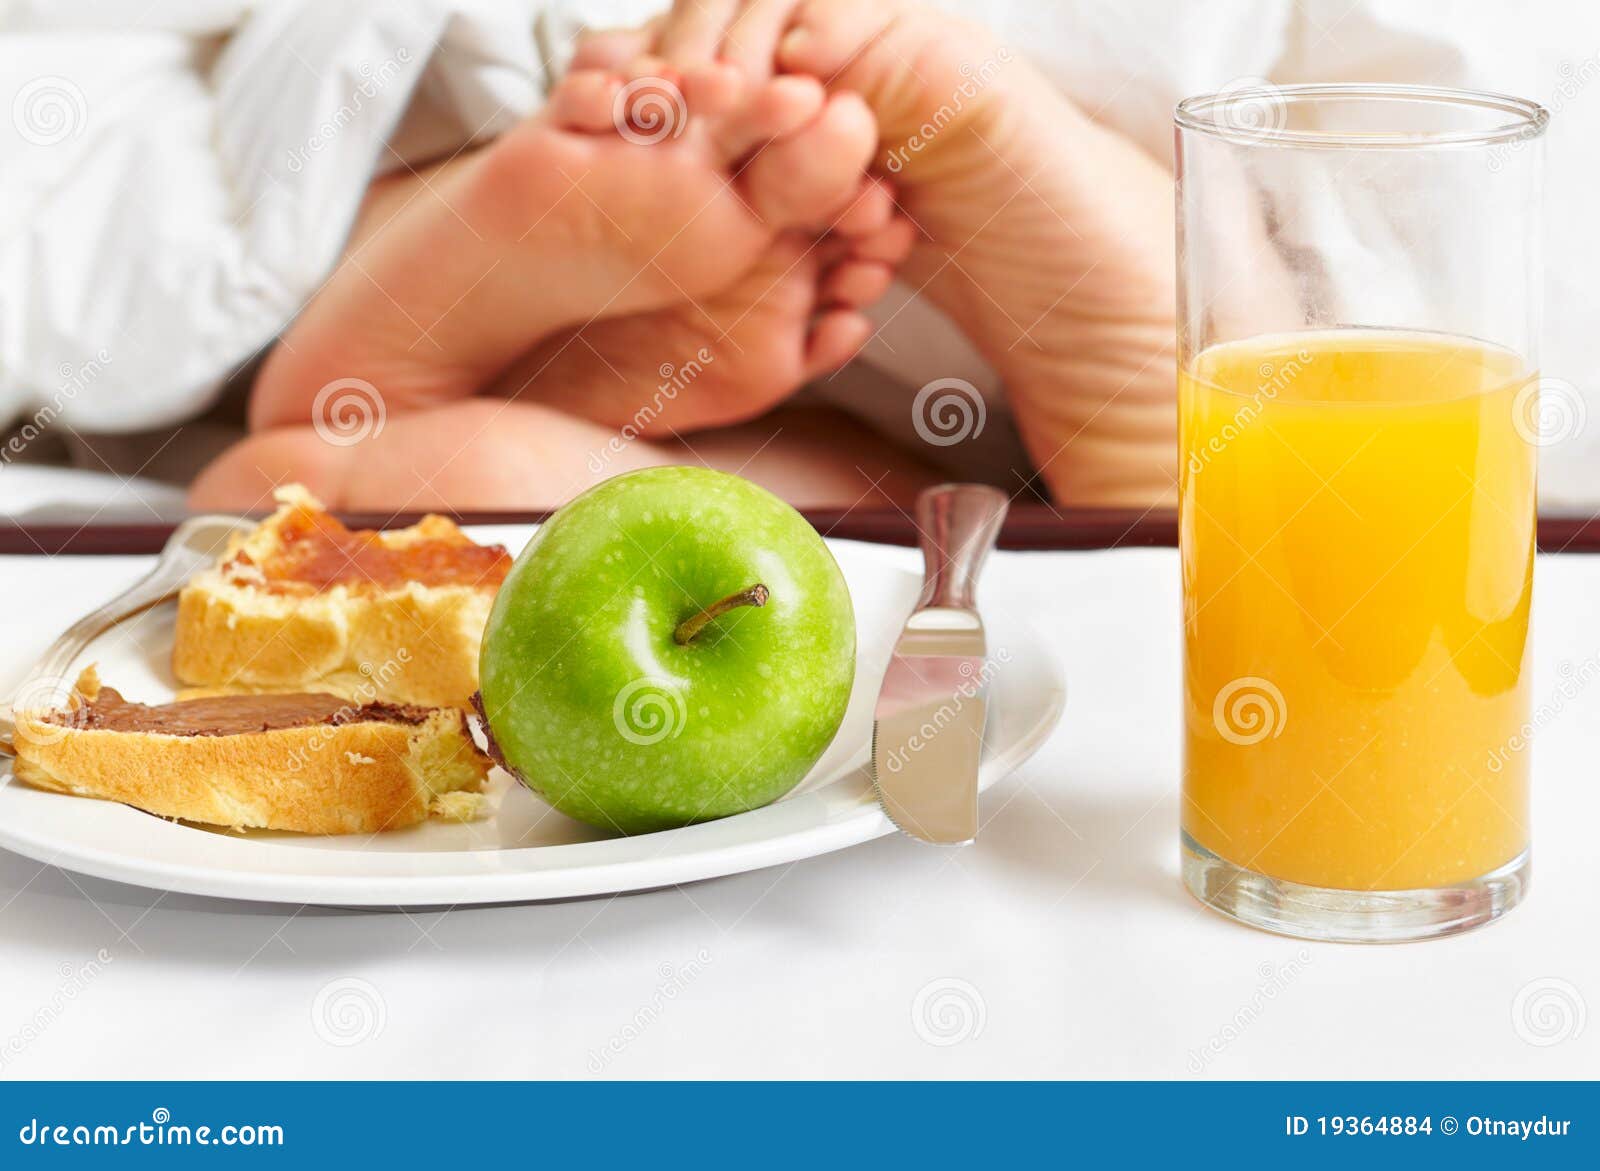 intimate couple and breakfast